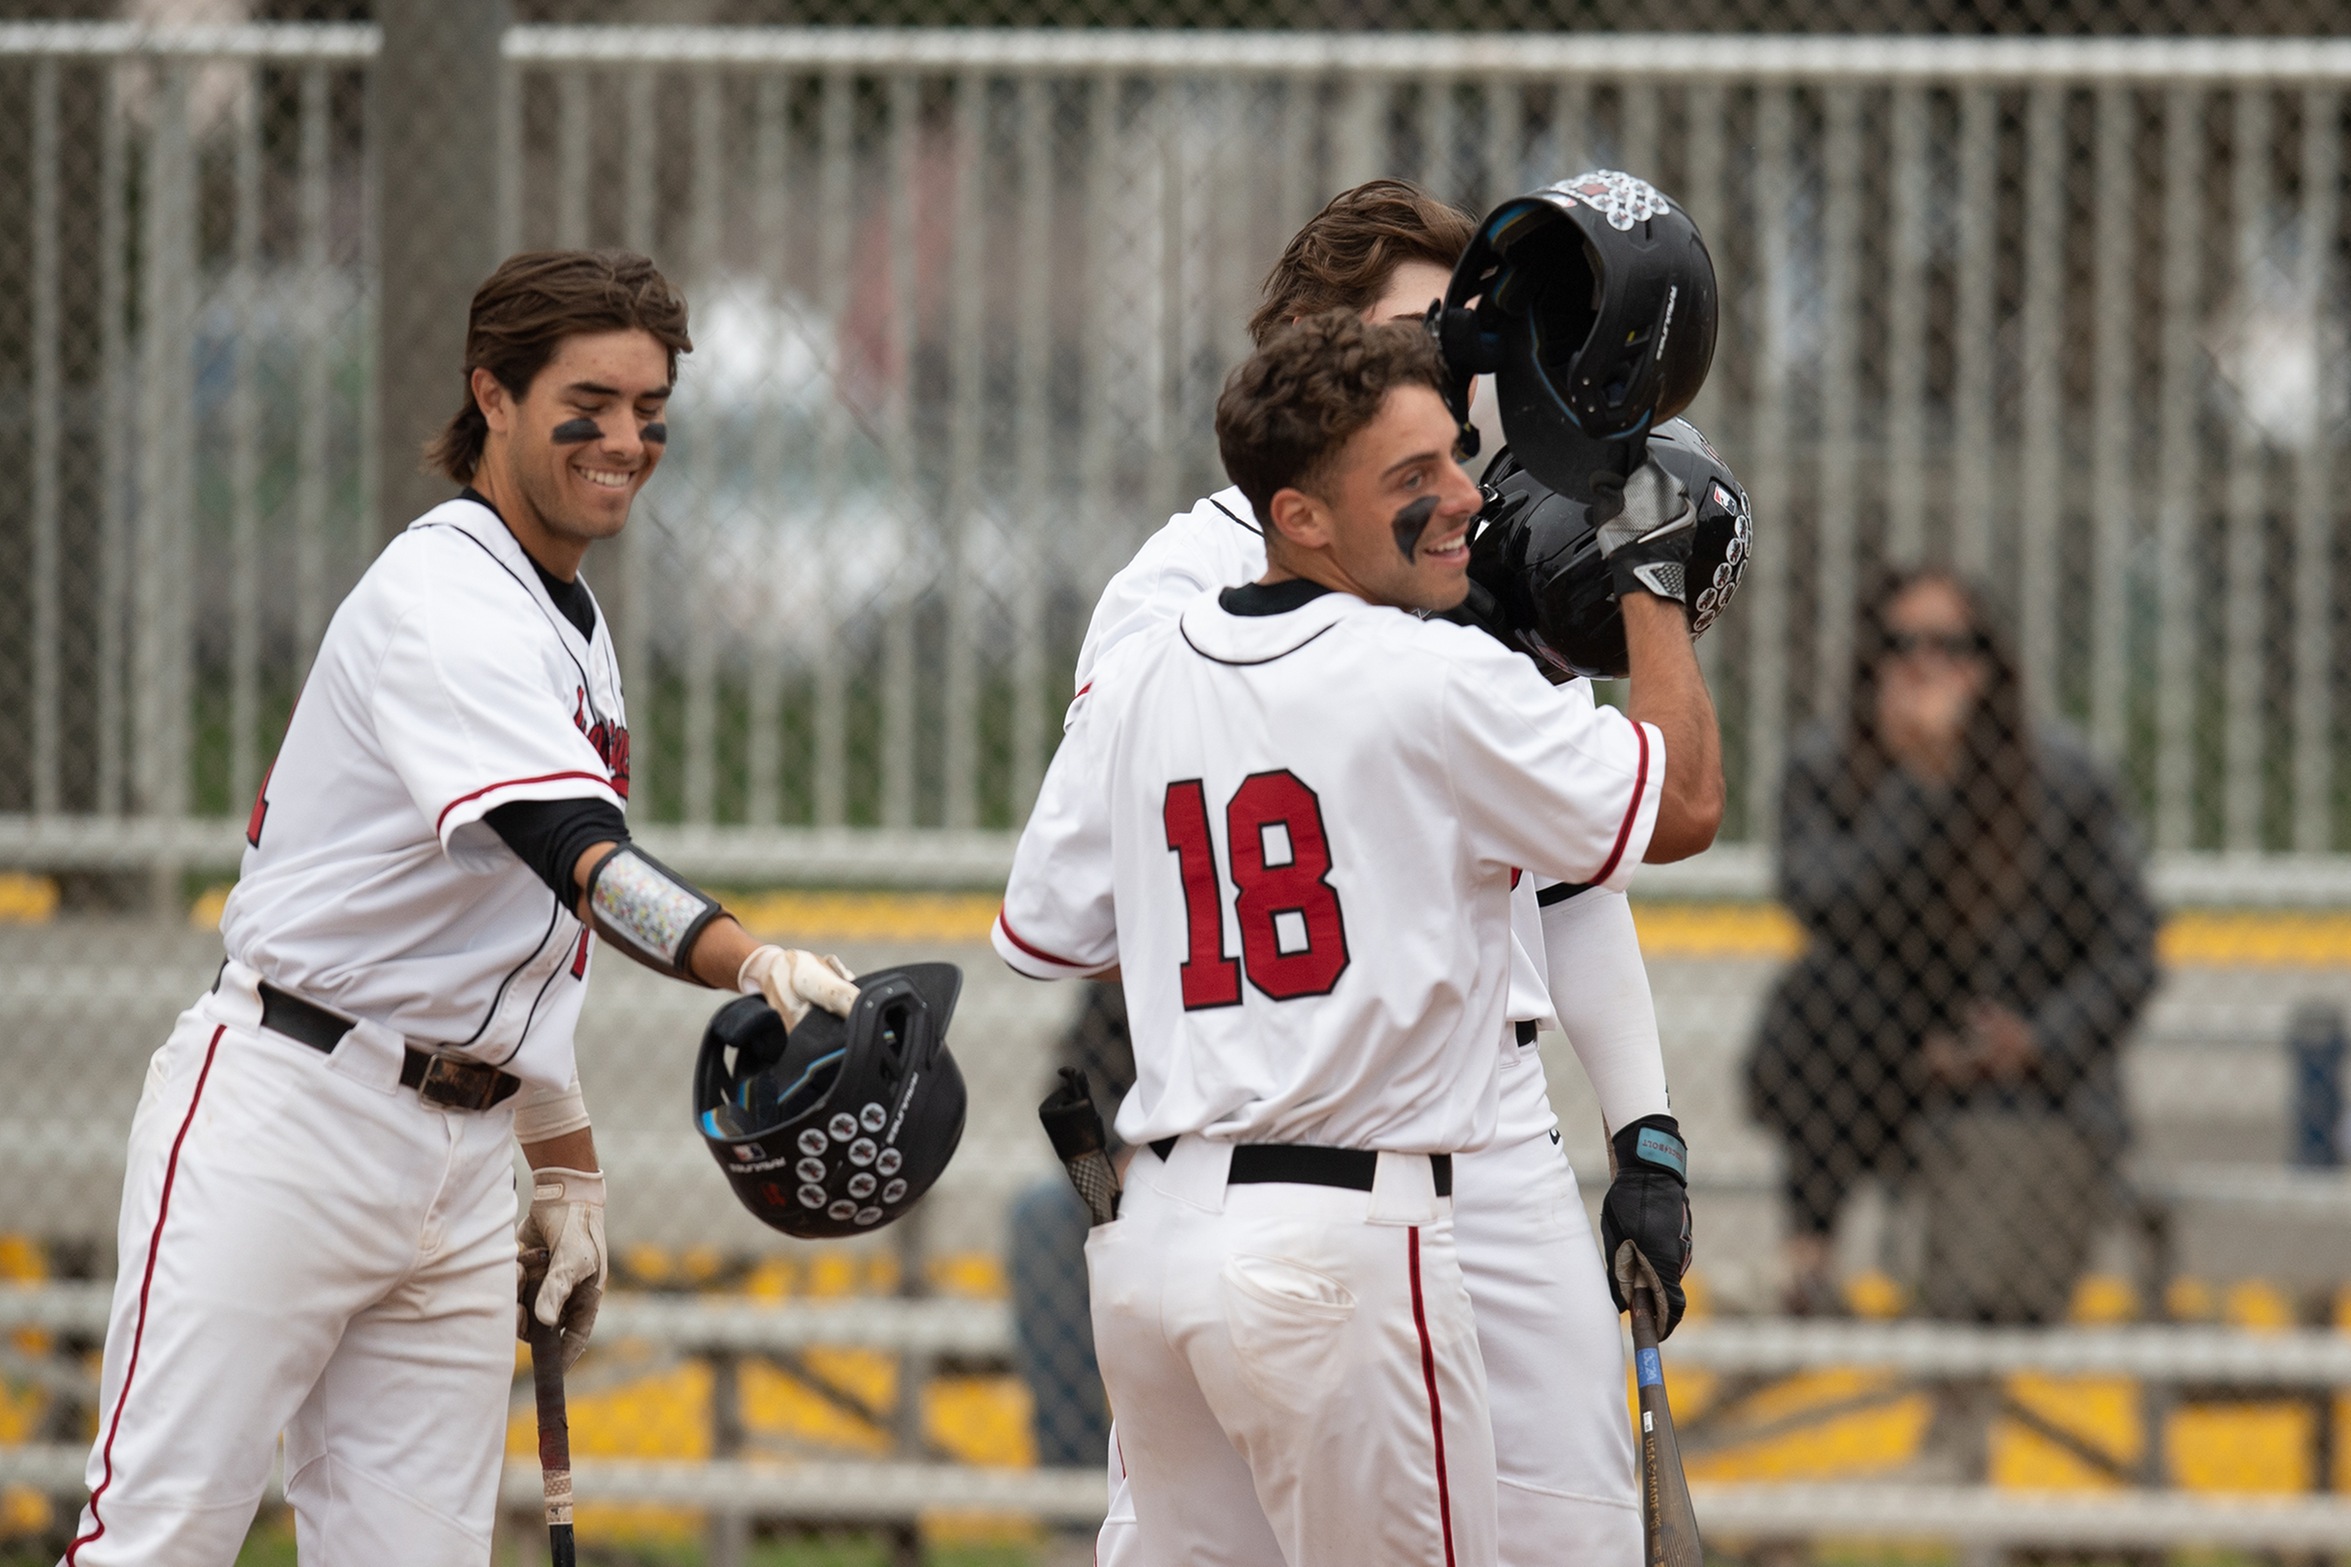 Vaqueros Usurp Cuesta for Conference Lead after Walk-off Win